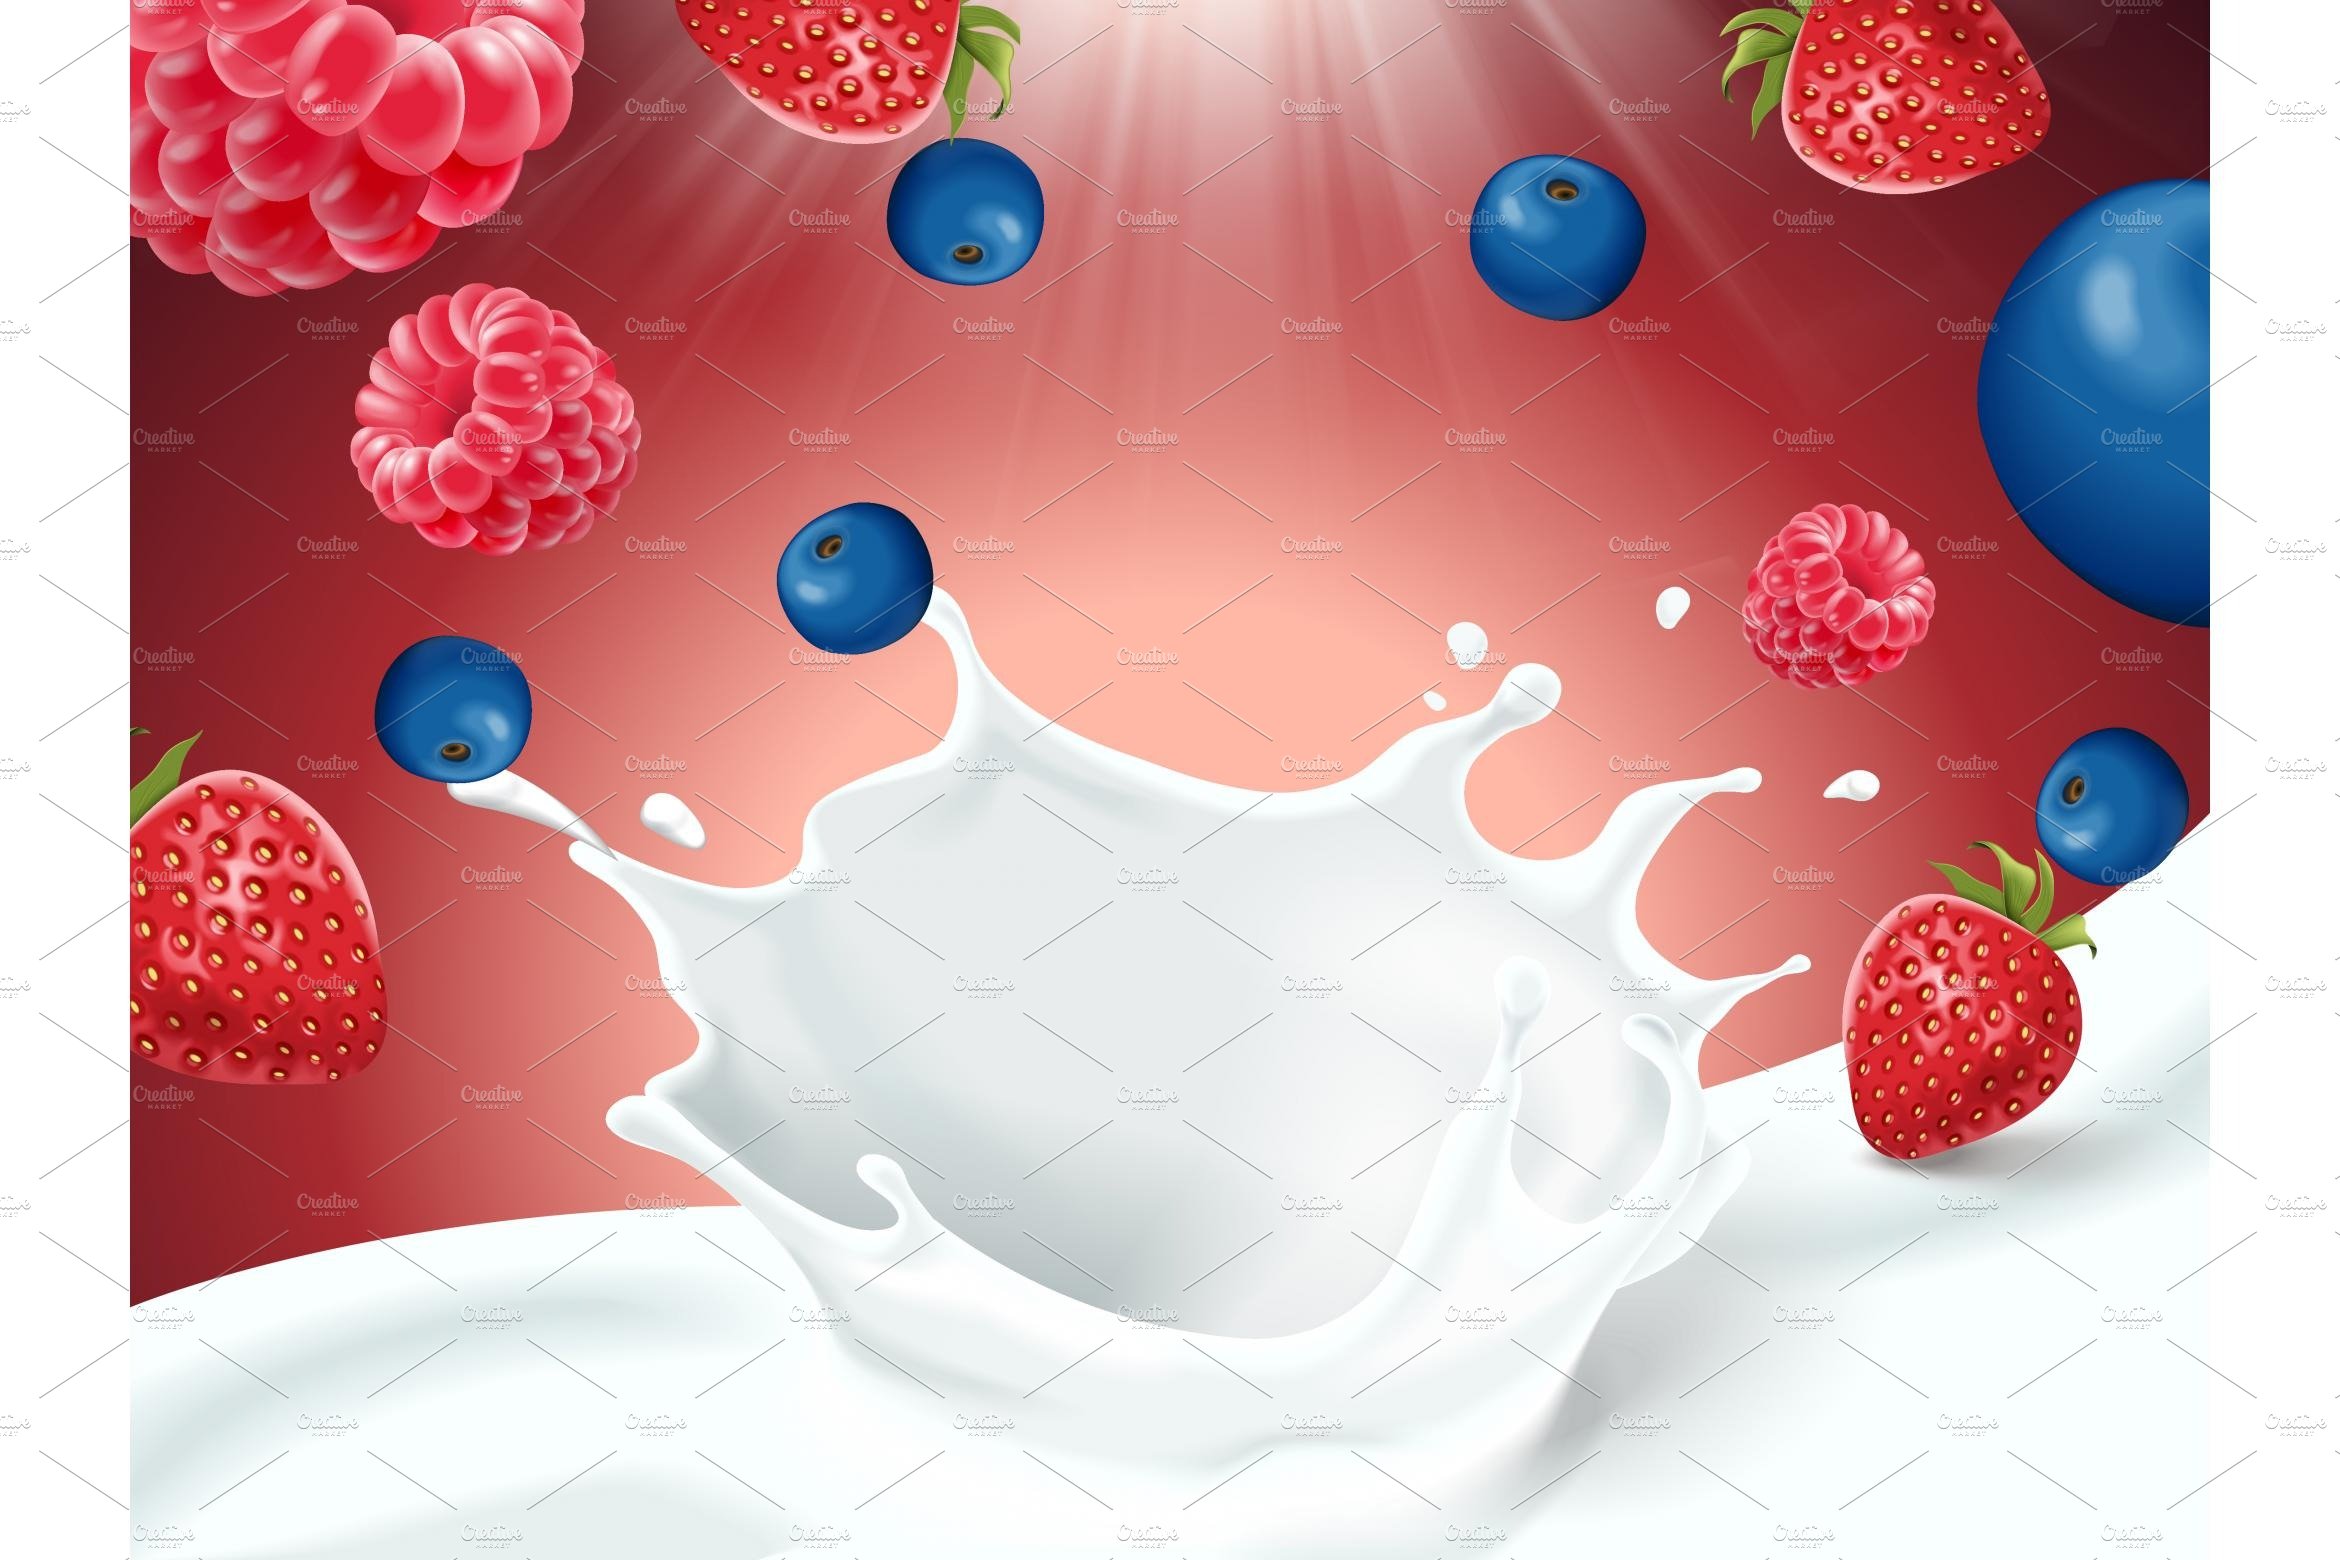 mixed berries with milk cover image.